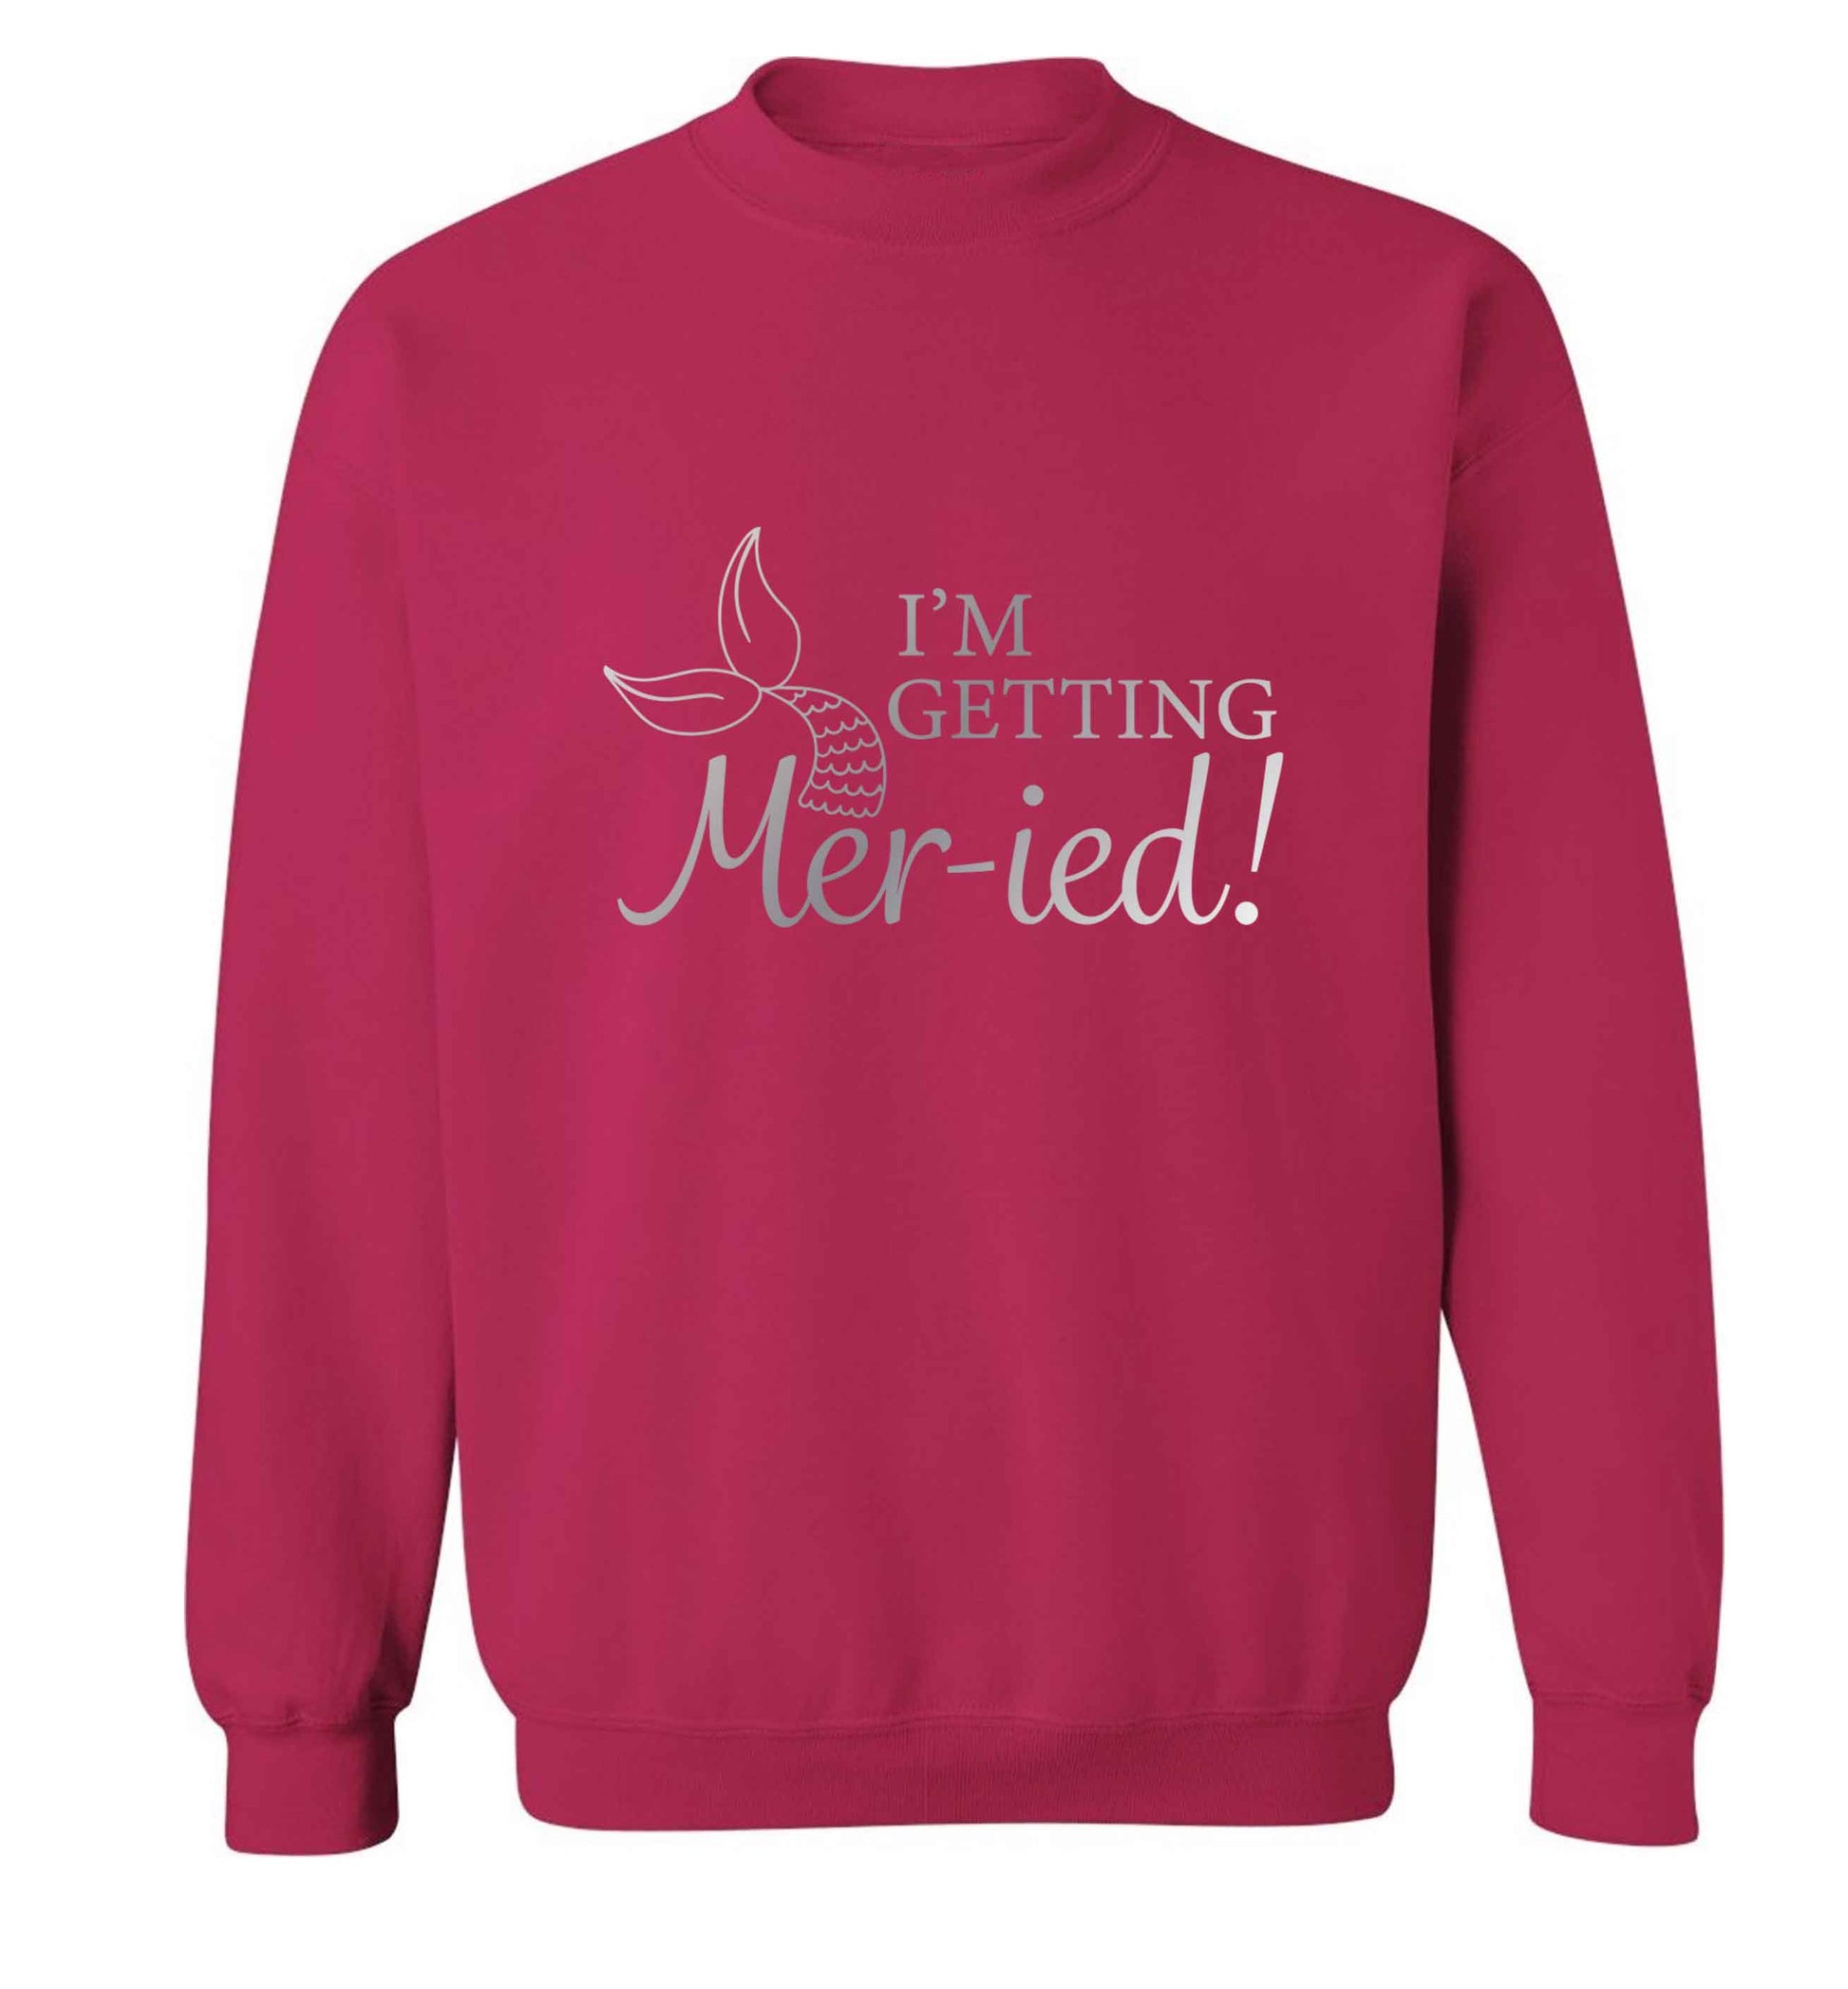 Personalised wedding thank you's Mr and Mrs wedding and date! Ideal wedding favours! adult's unisex pink sweater 2XL